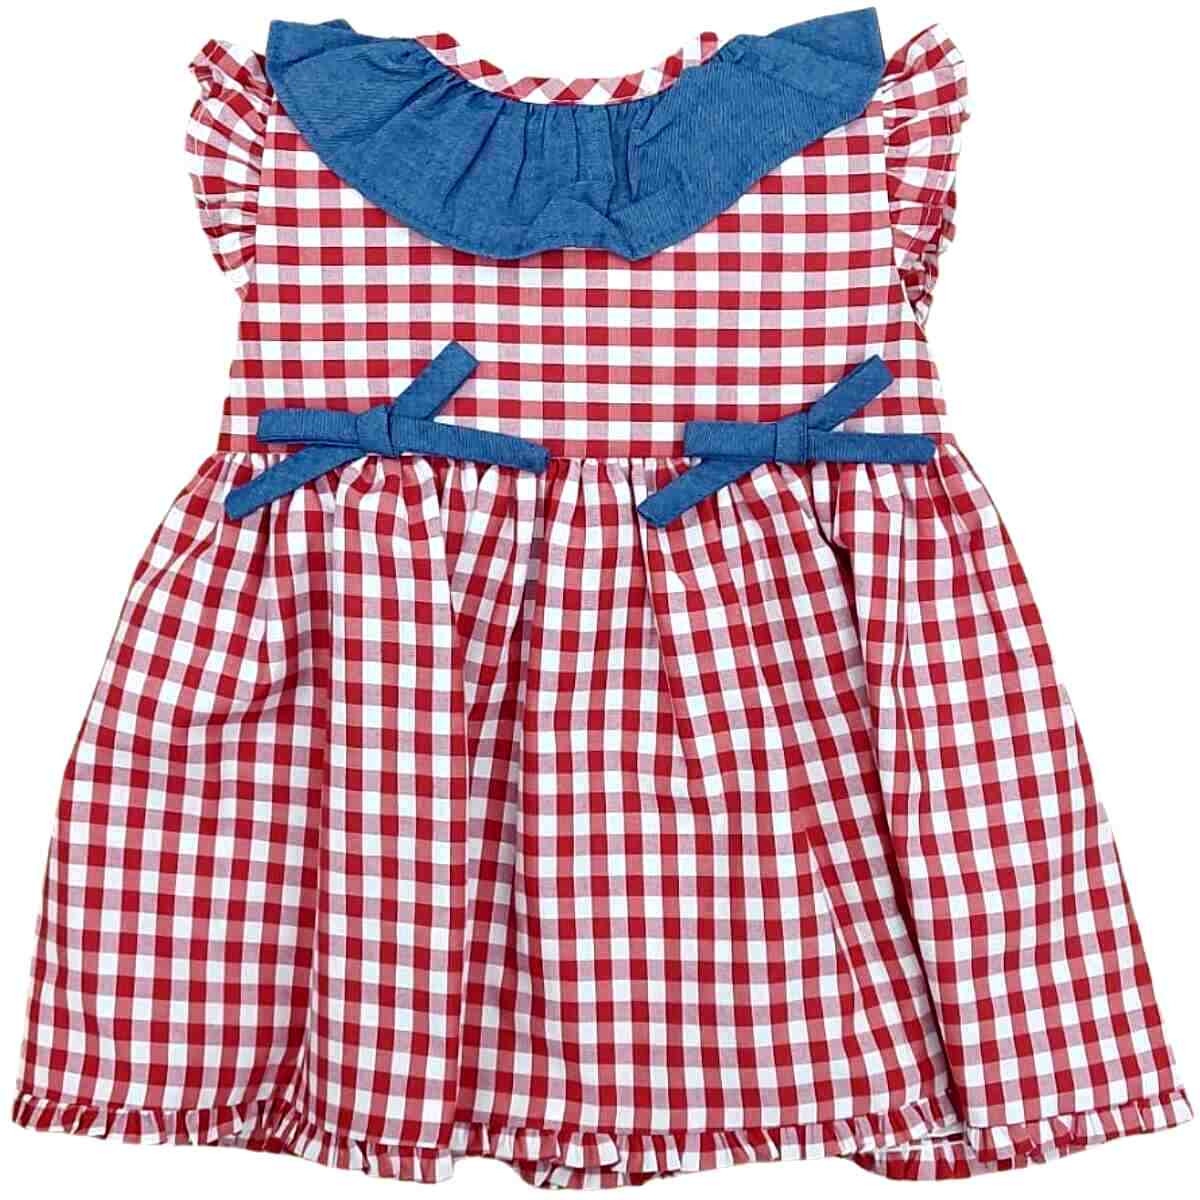 RED CHECK DRESS WITH BLUE BOWS BABYFERR - 1